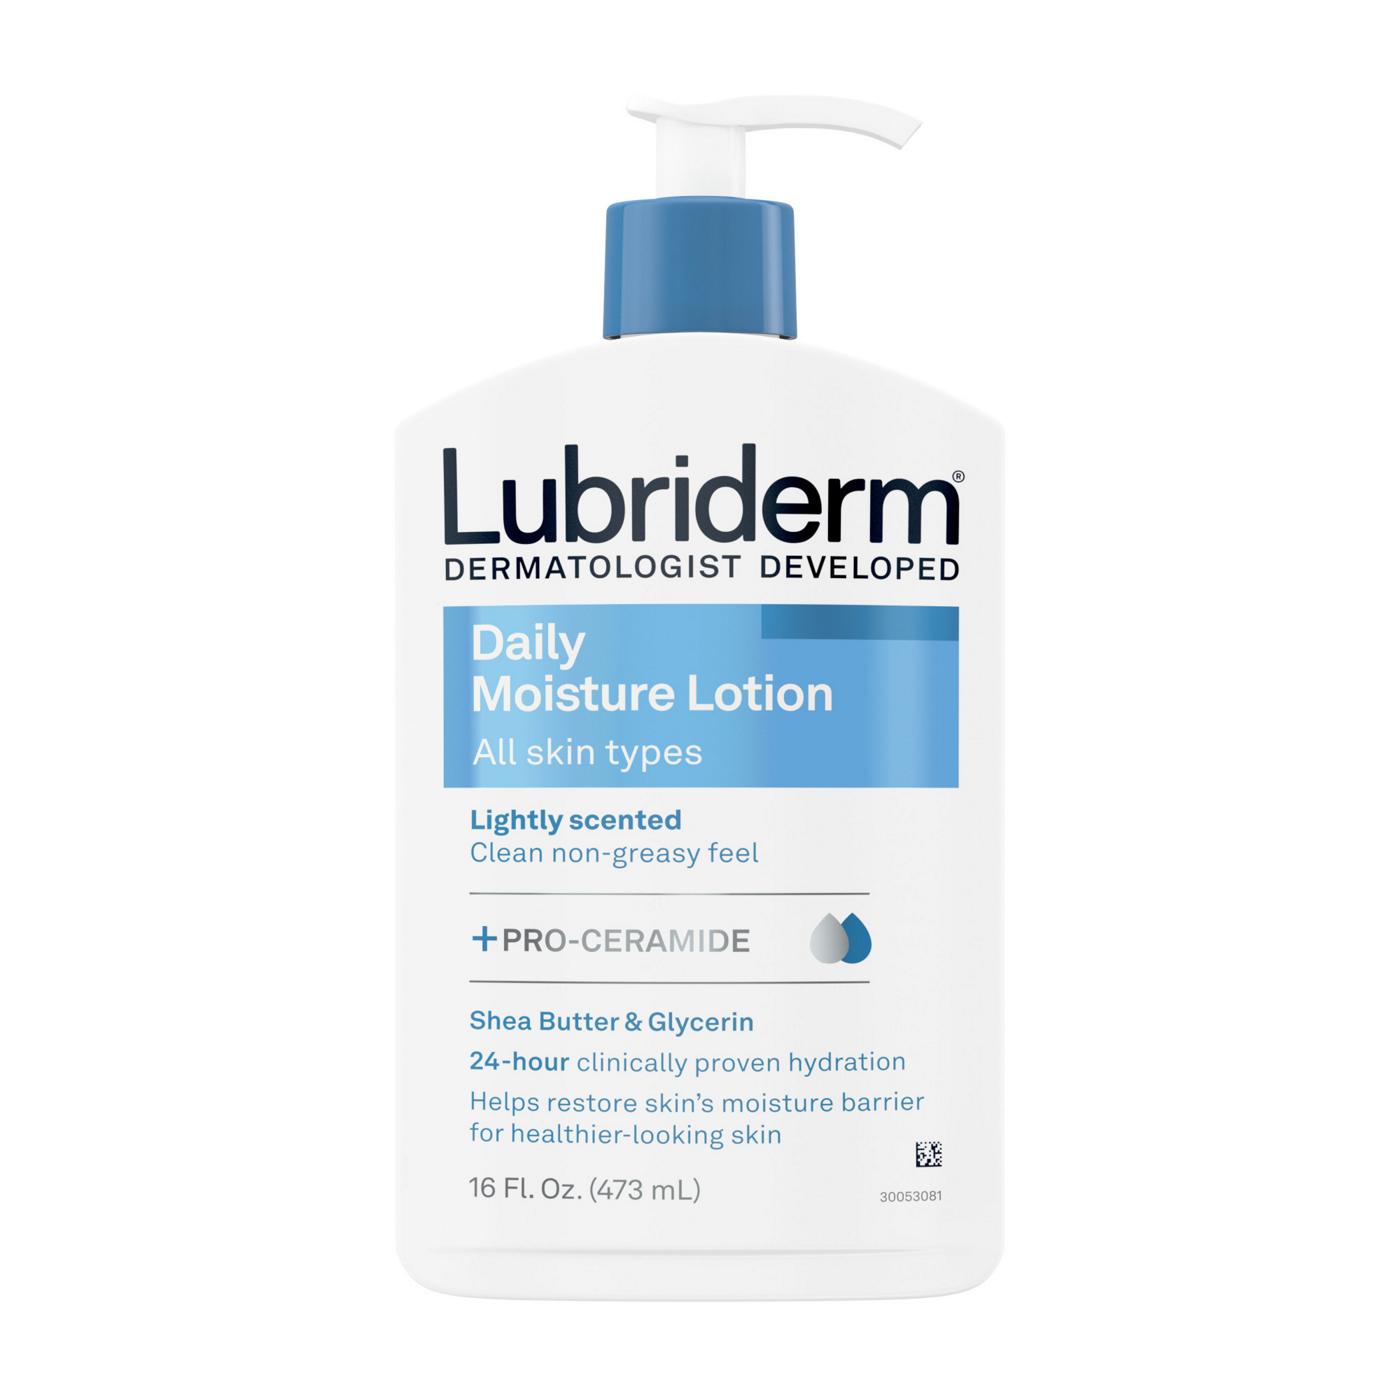 Lubriderm Daily Moisture Lotion; image 1 of 9